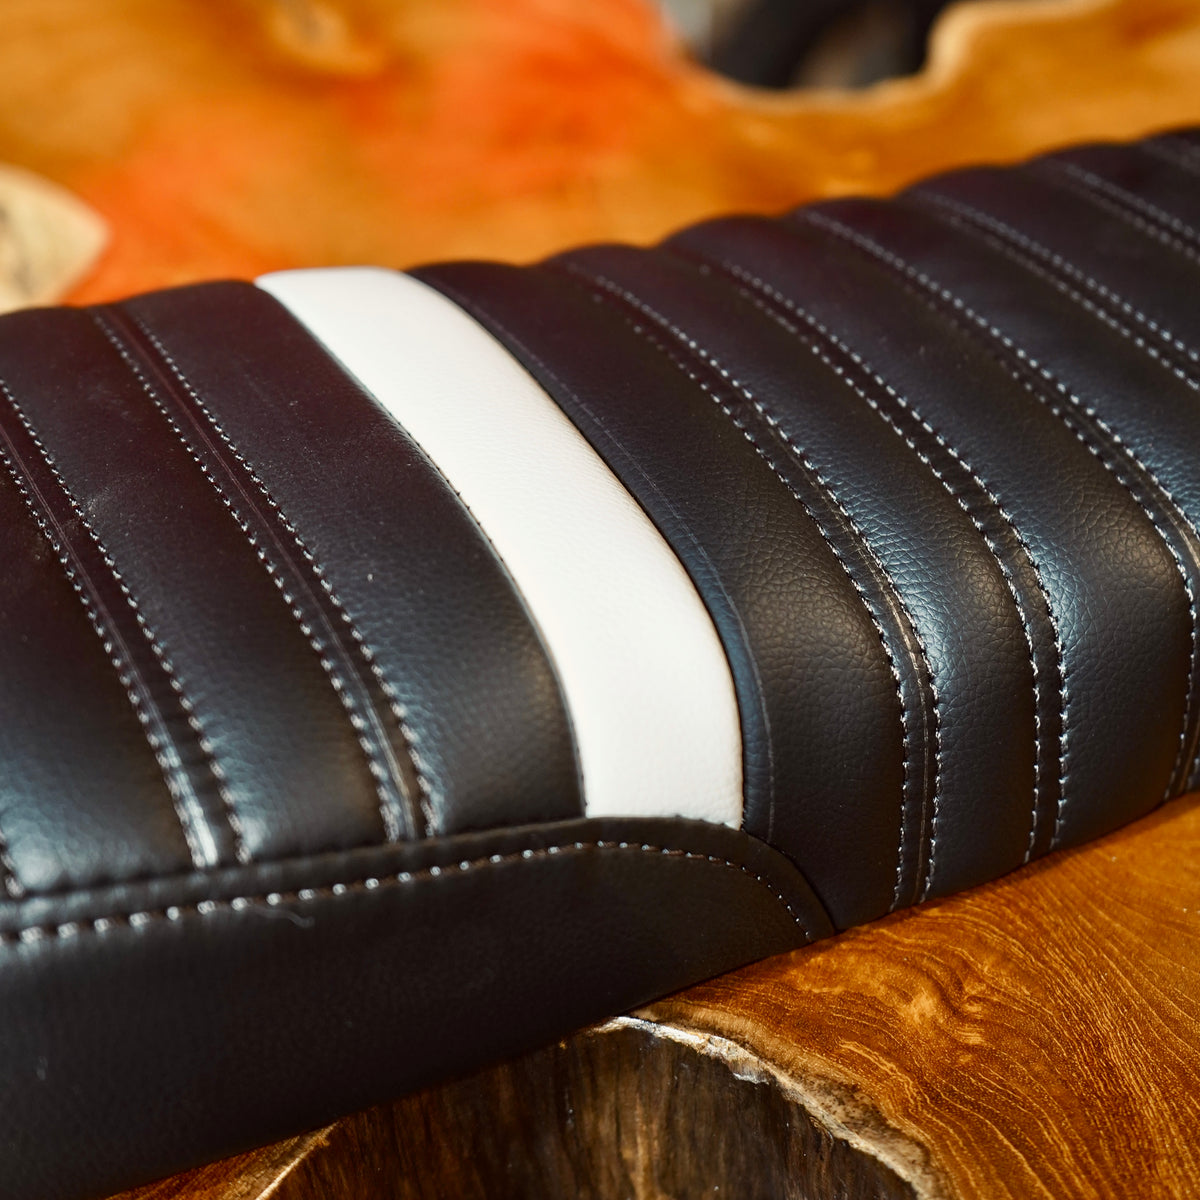 Close up shot of the synthetic leather material.